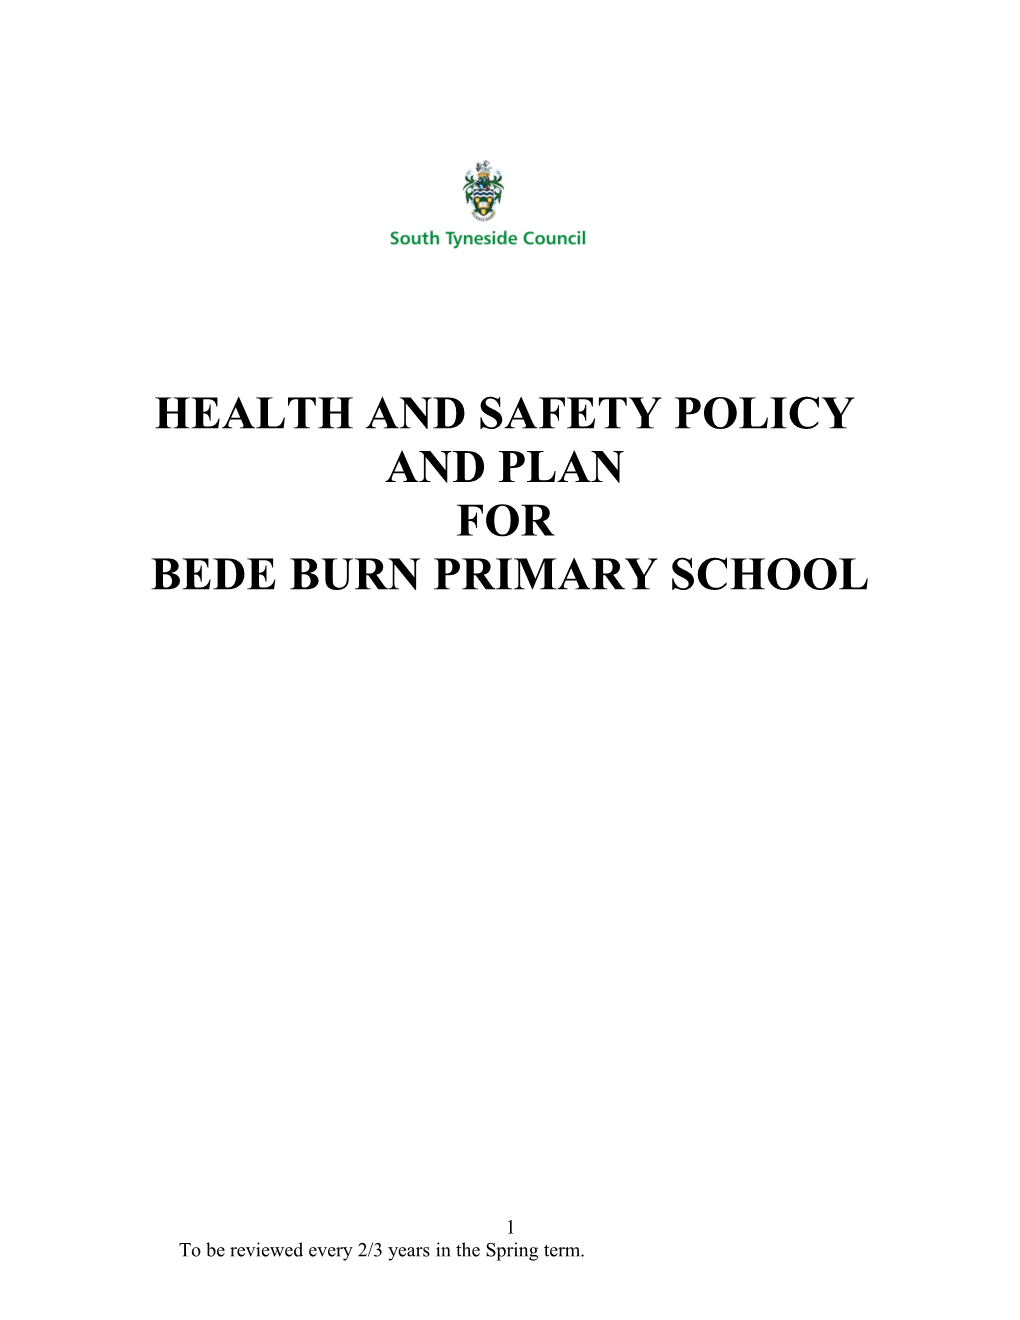 Model Health & Safety Policy Statement for All Schools